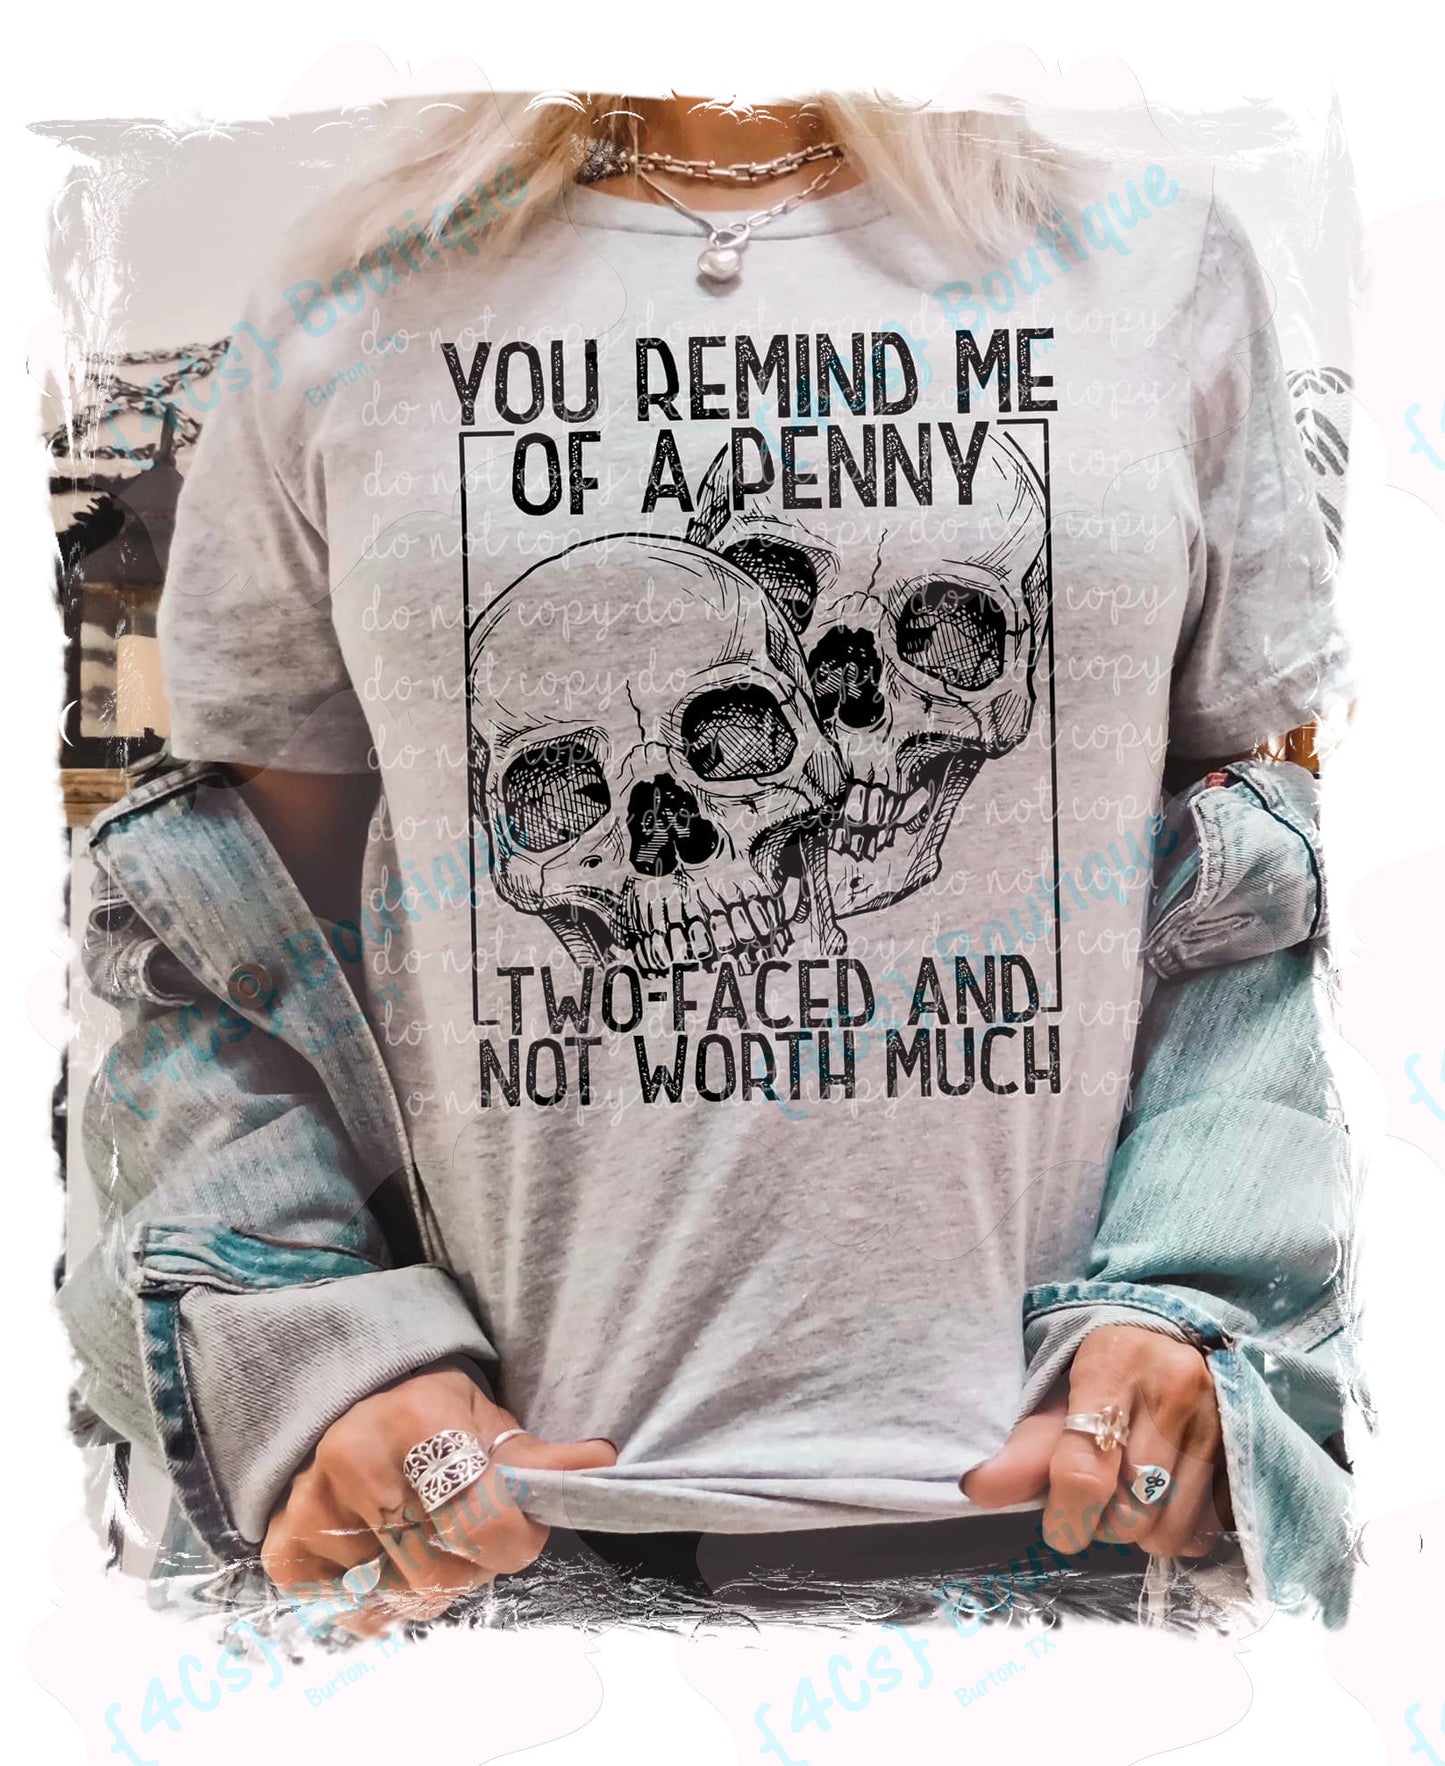 You Remind Me Of A Penny Two-Faced And Not Worth Much Shirt